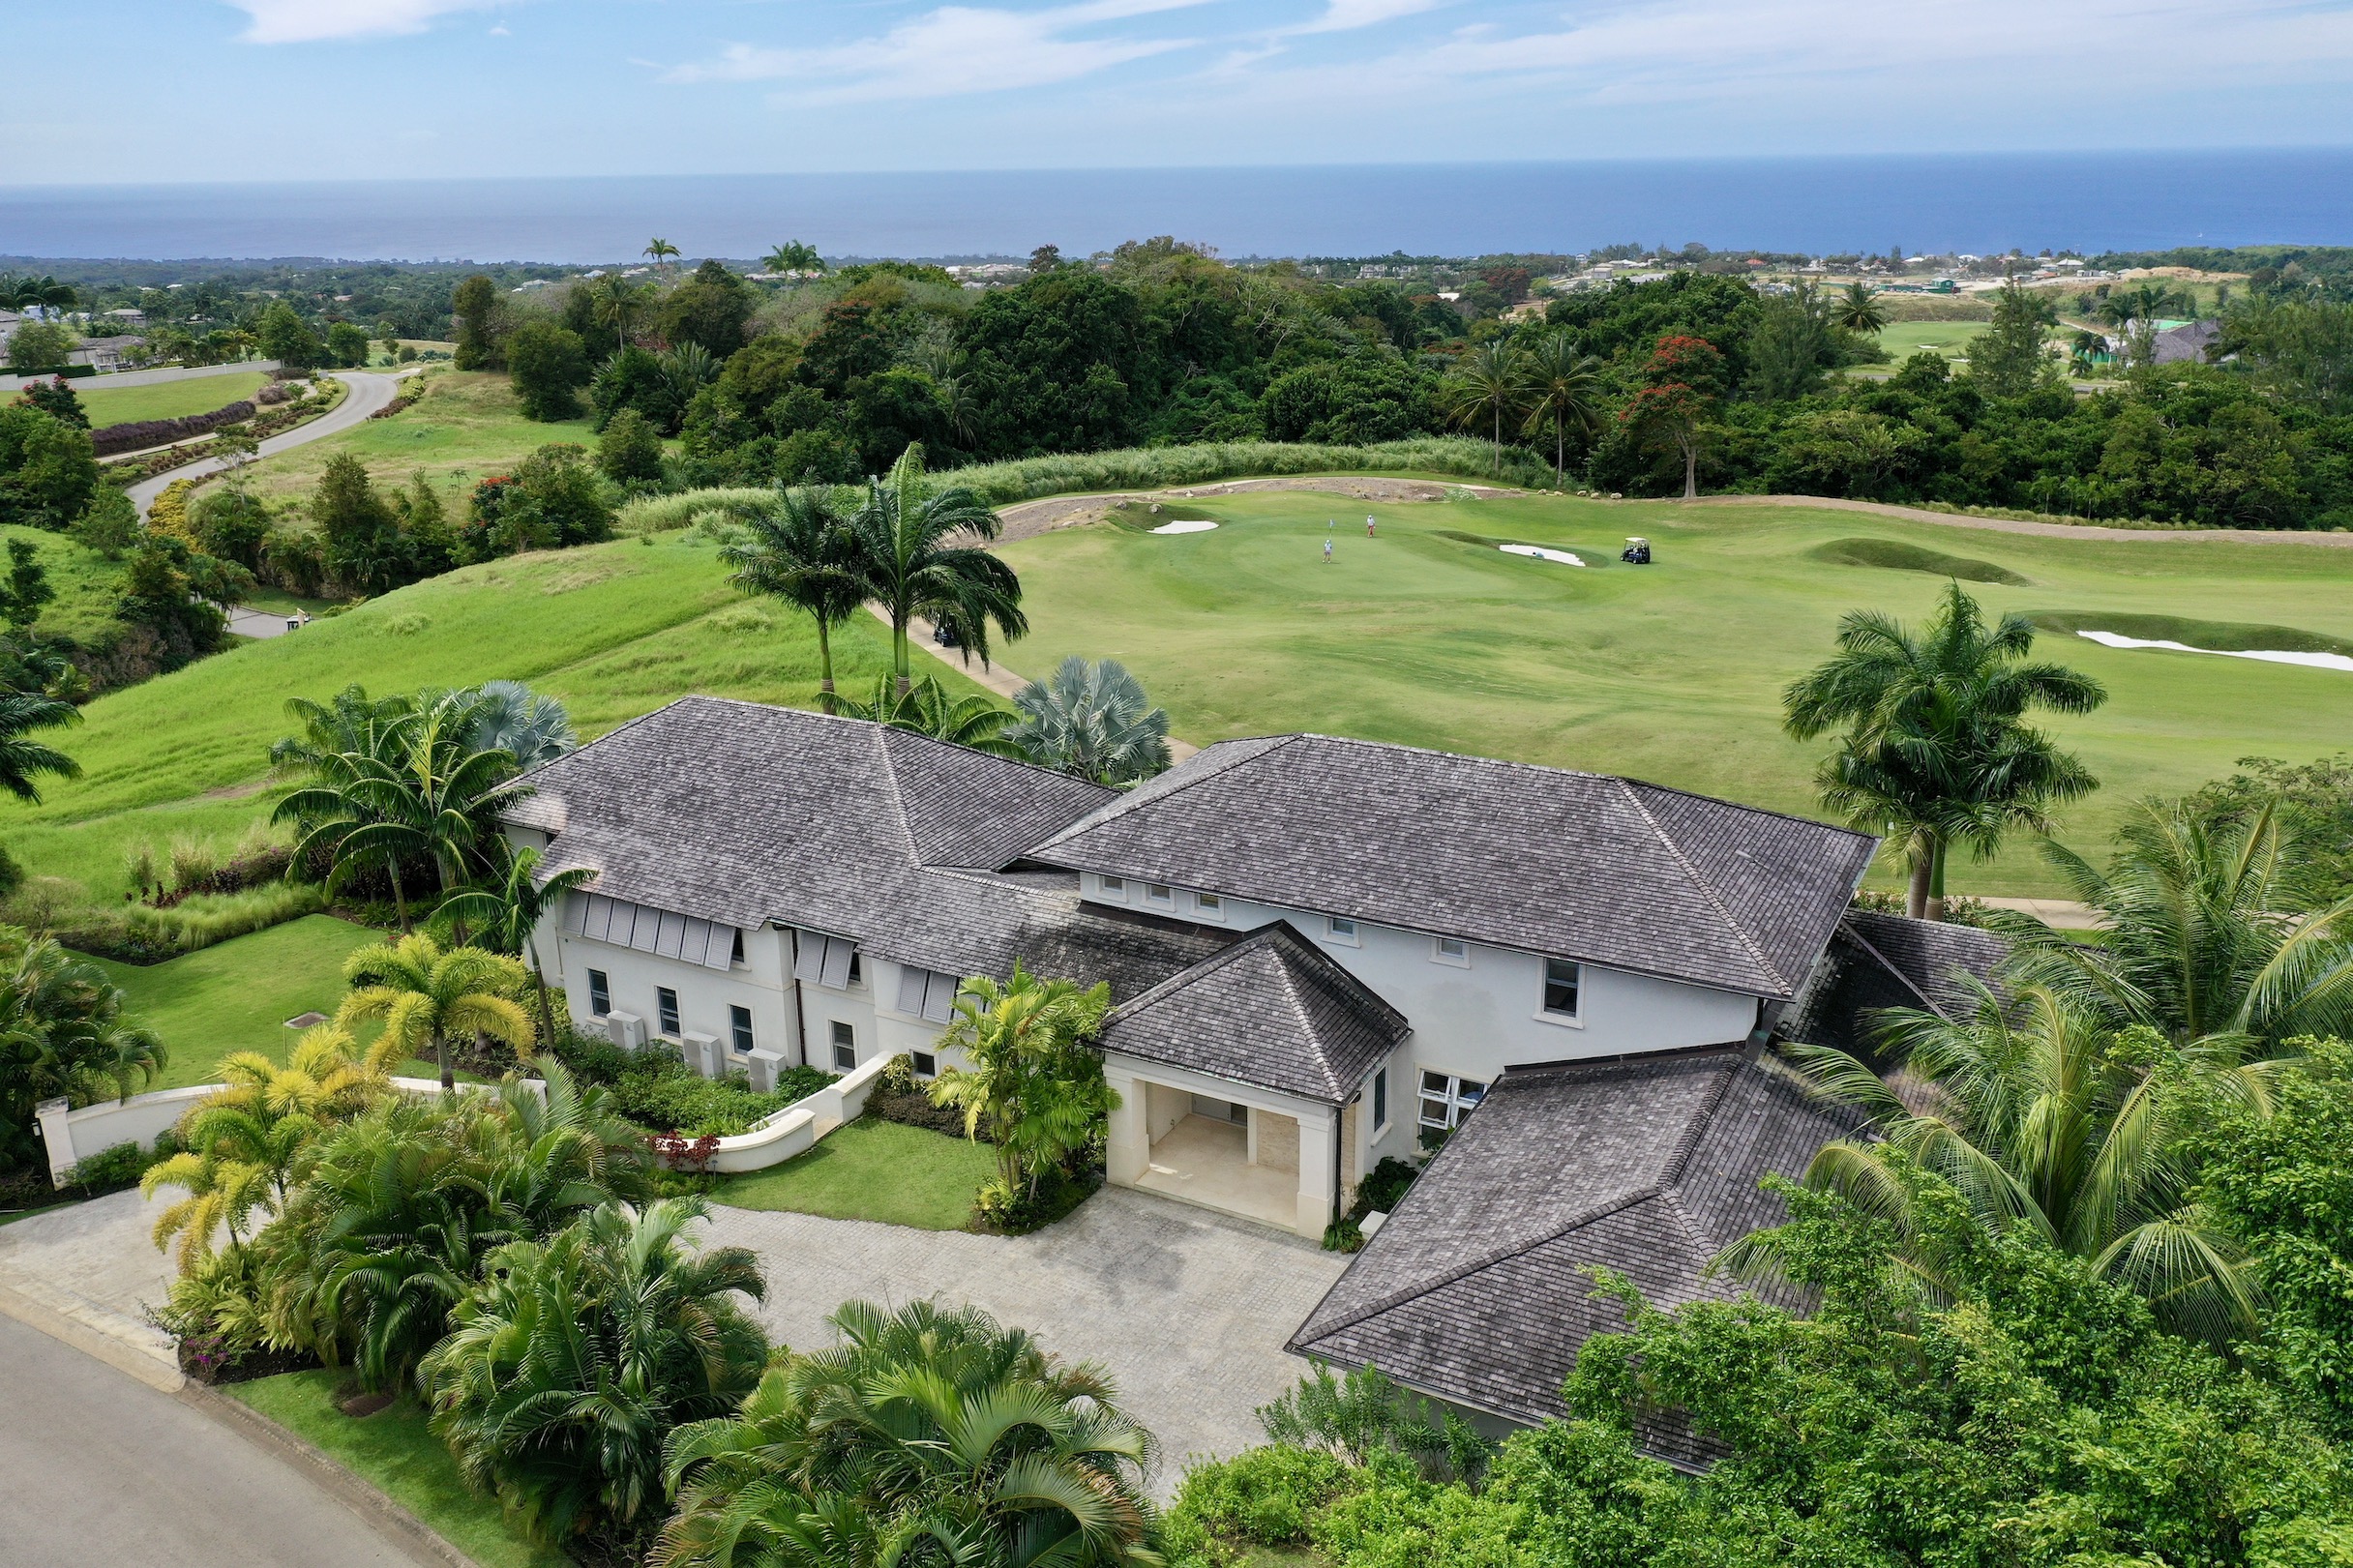 Aerial shot of a luxury holiday villa on a golf course